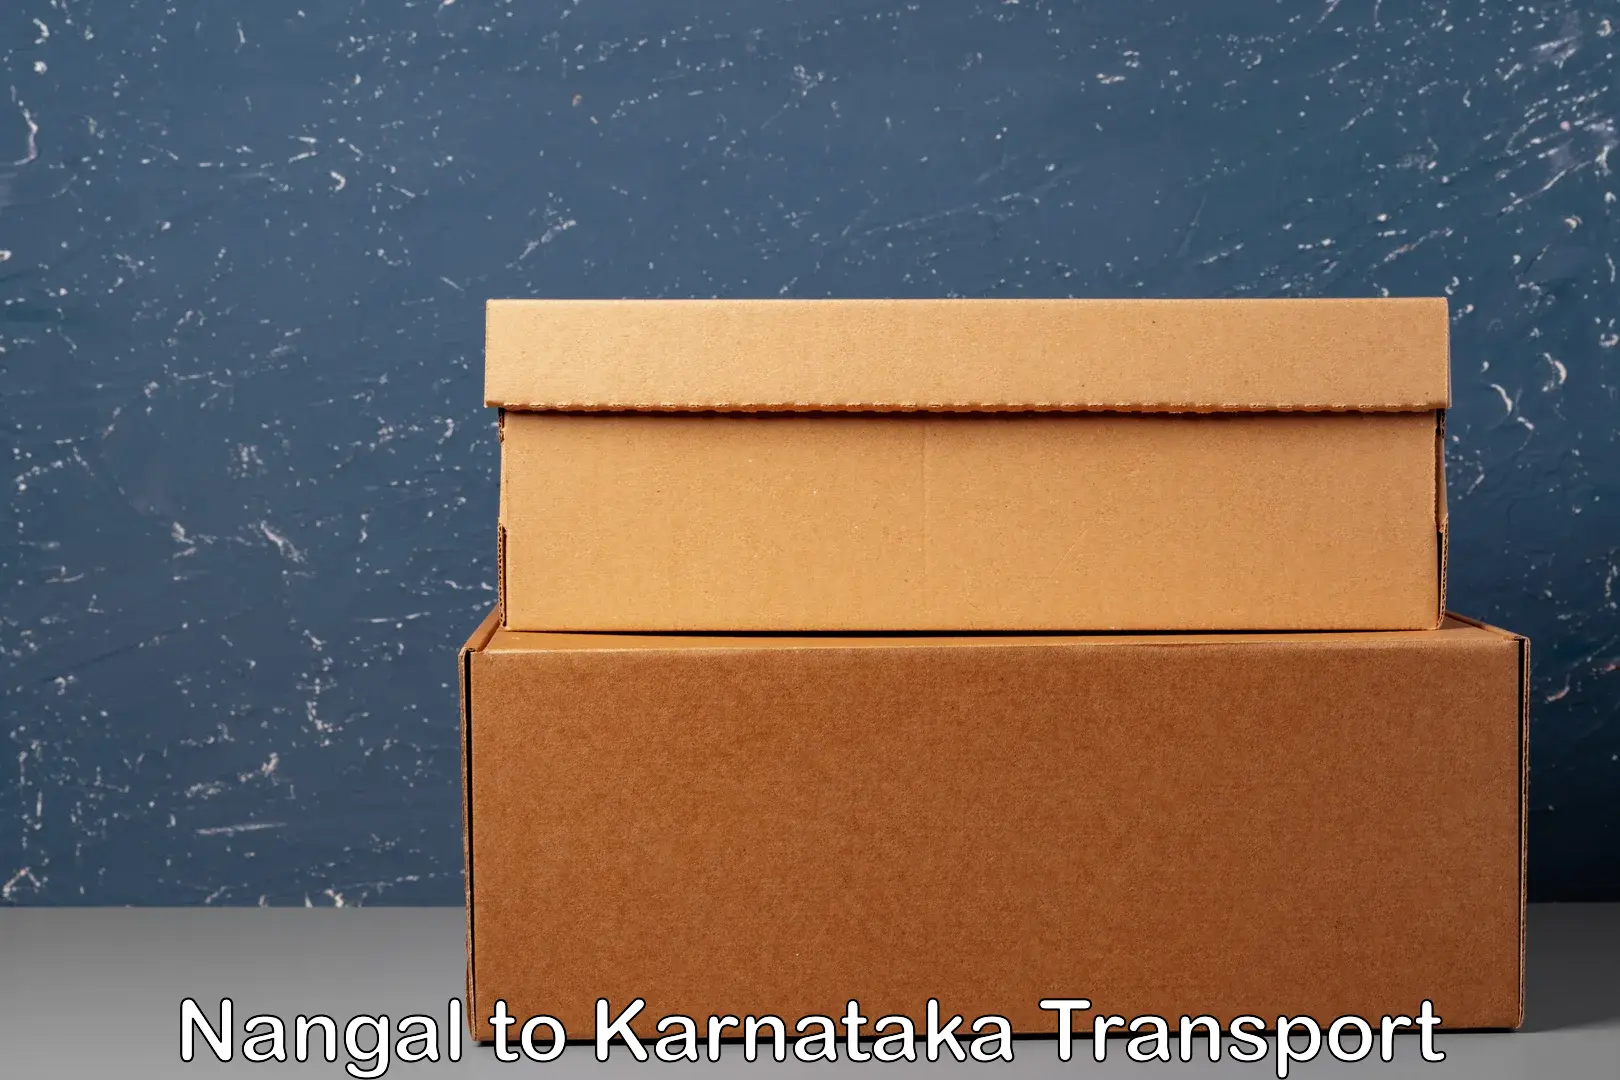 Container transportation services in Nangal to Karnataka